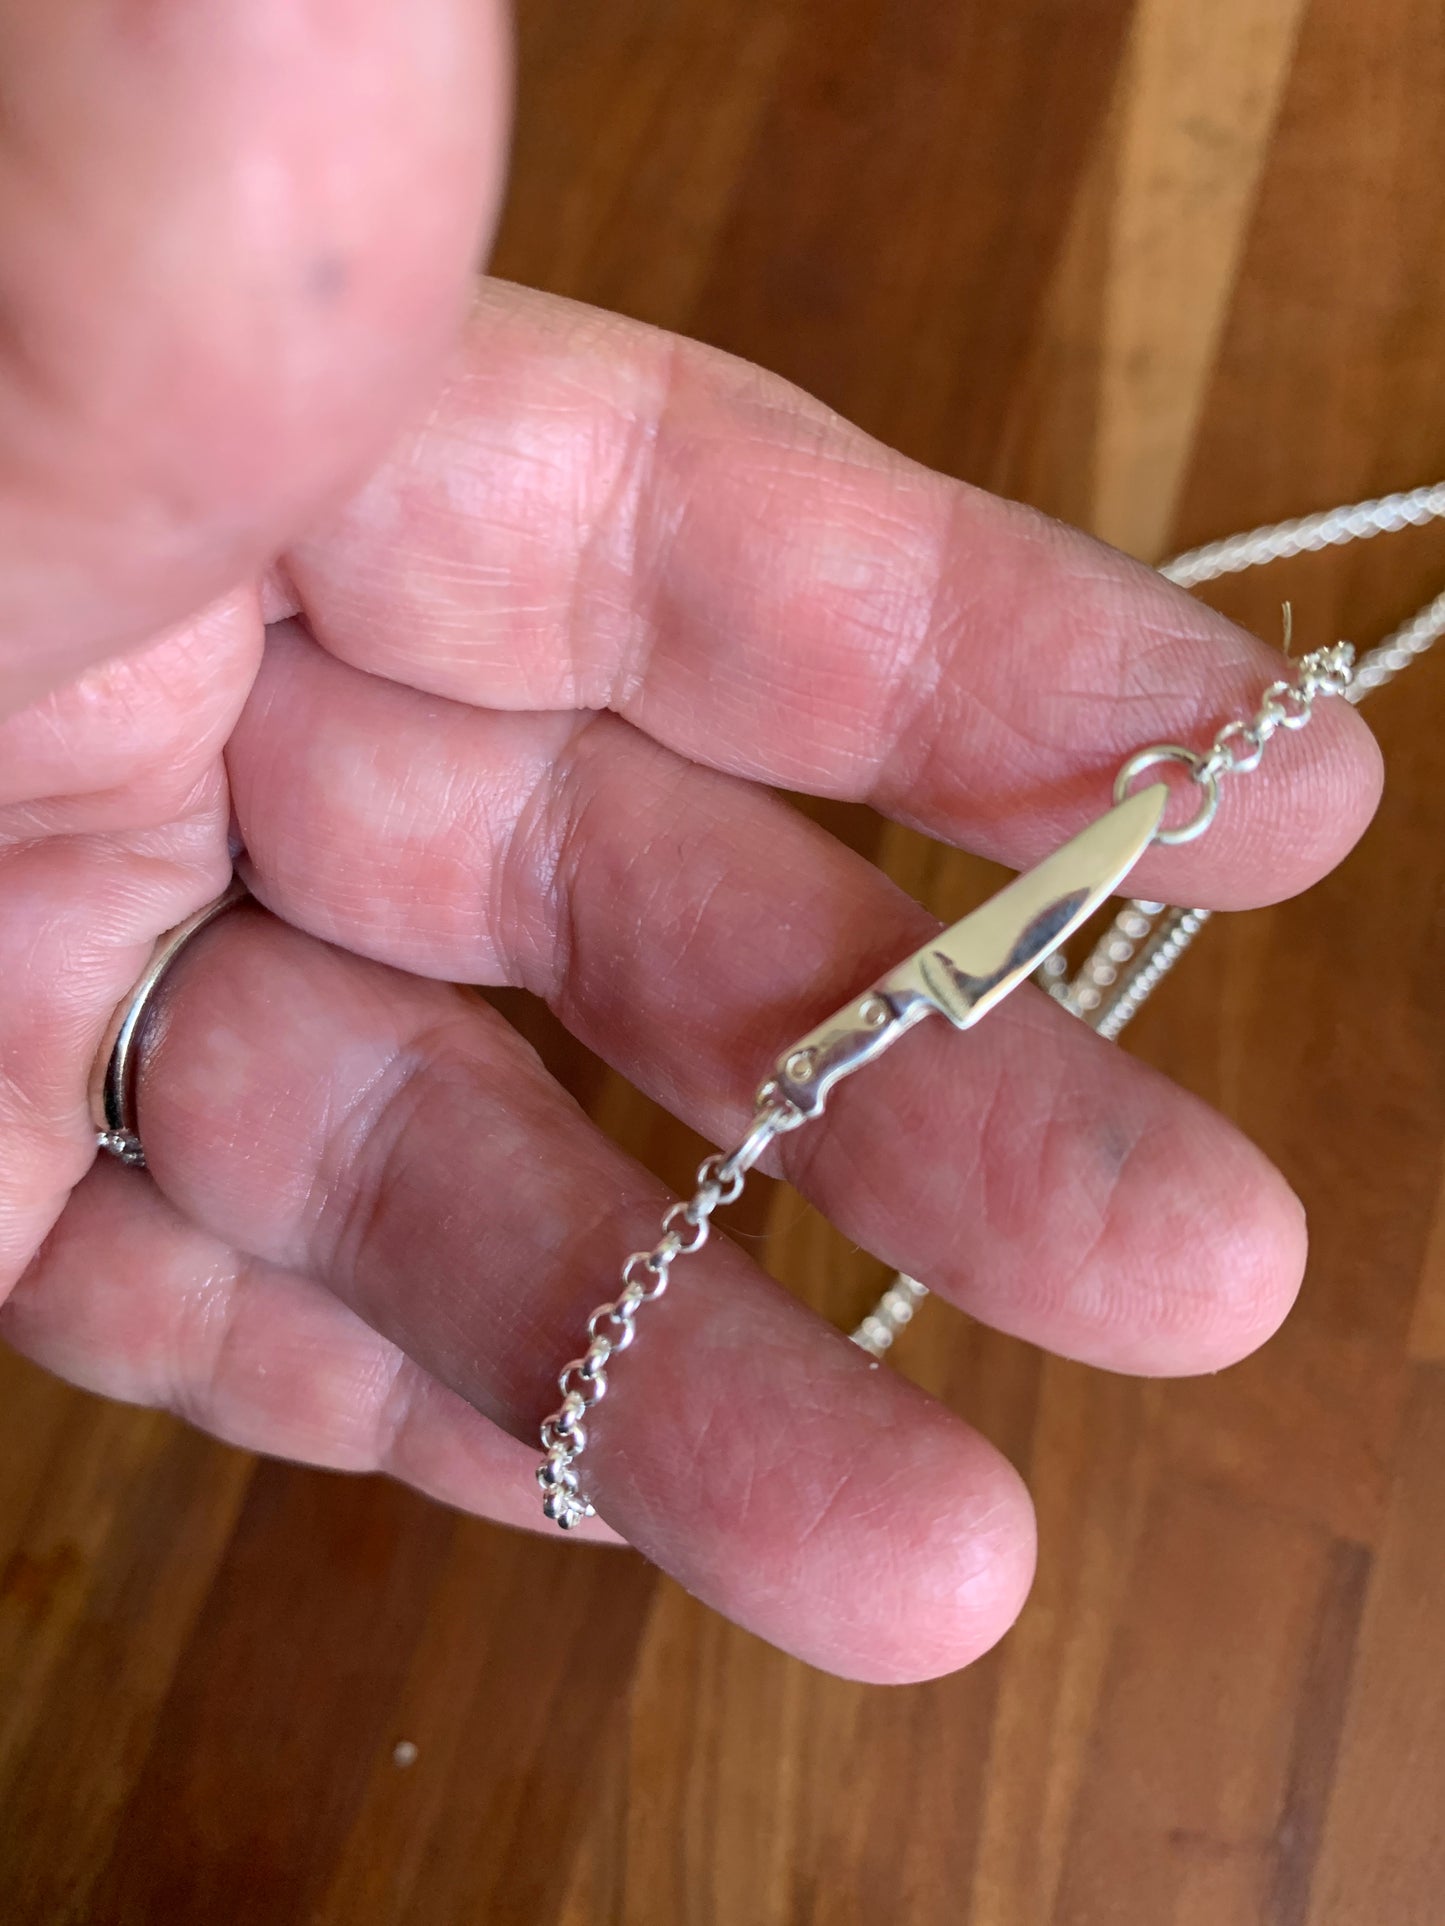 Chef Knife Chain Necklace in Sterling Silver